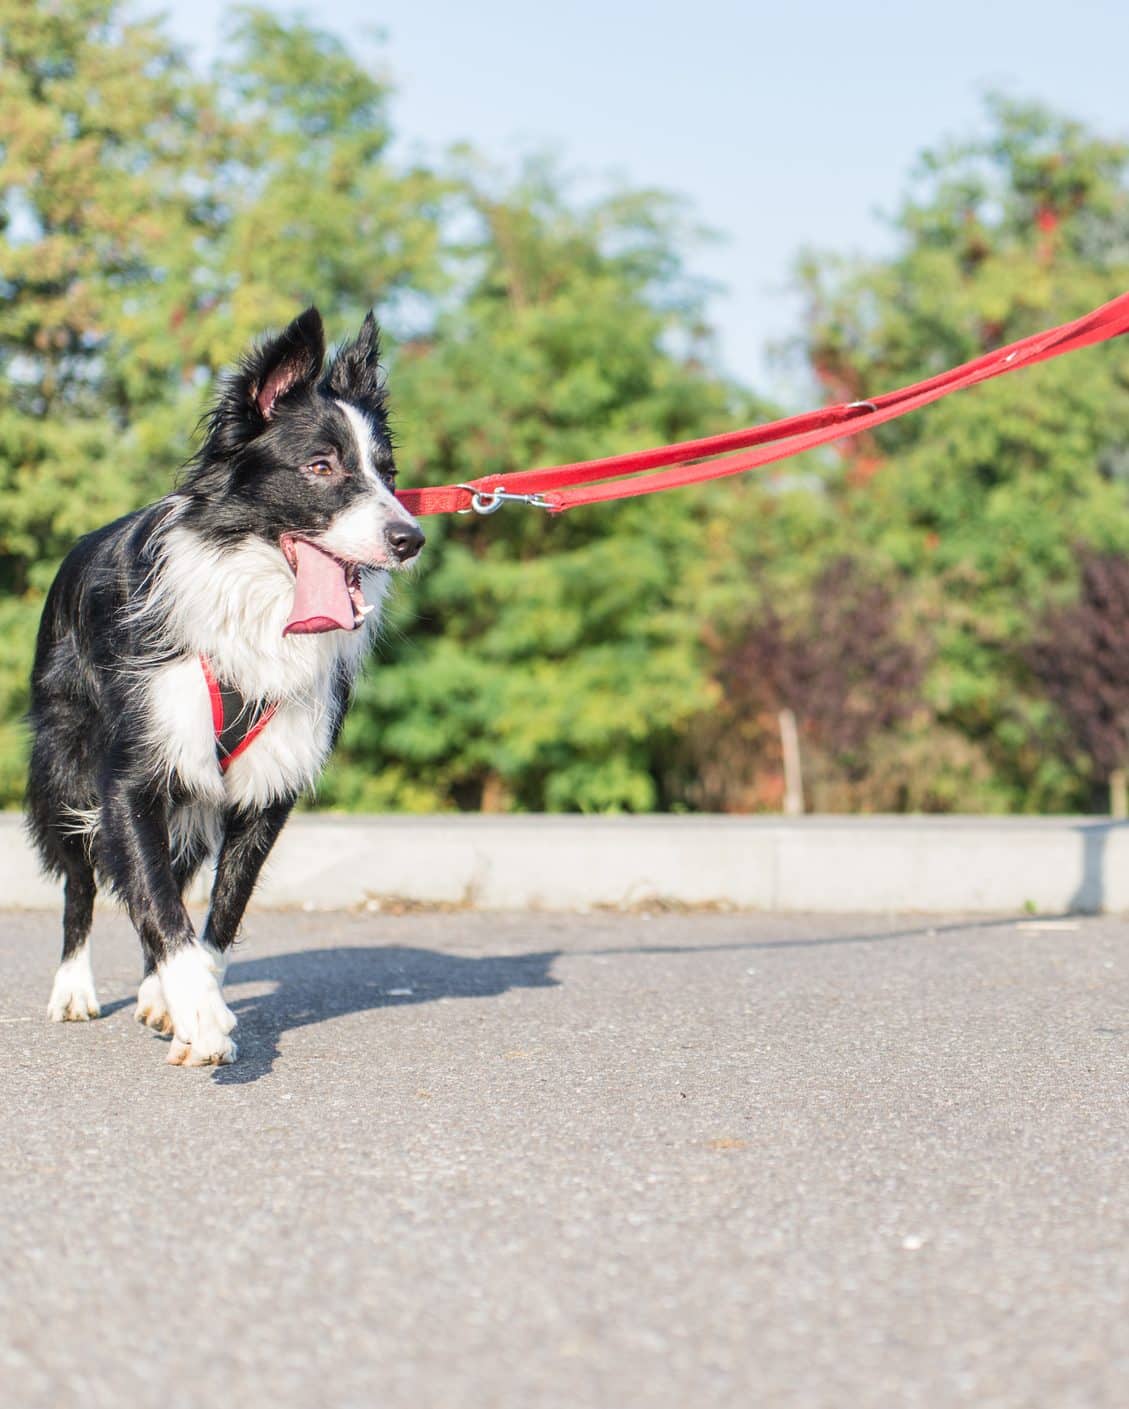 A dog being walked on a leash